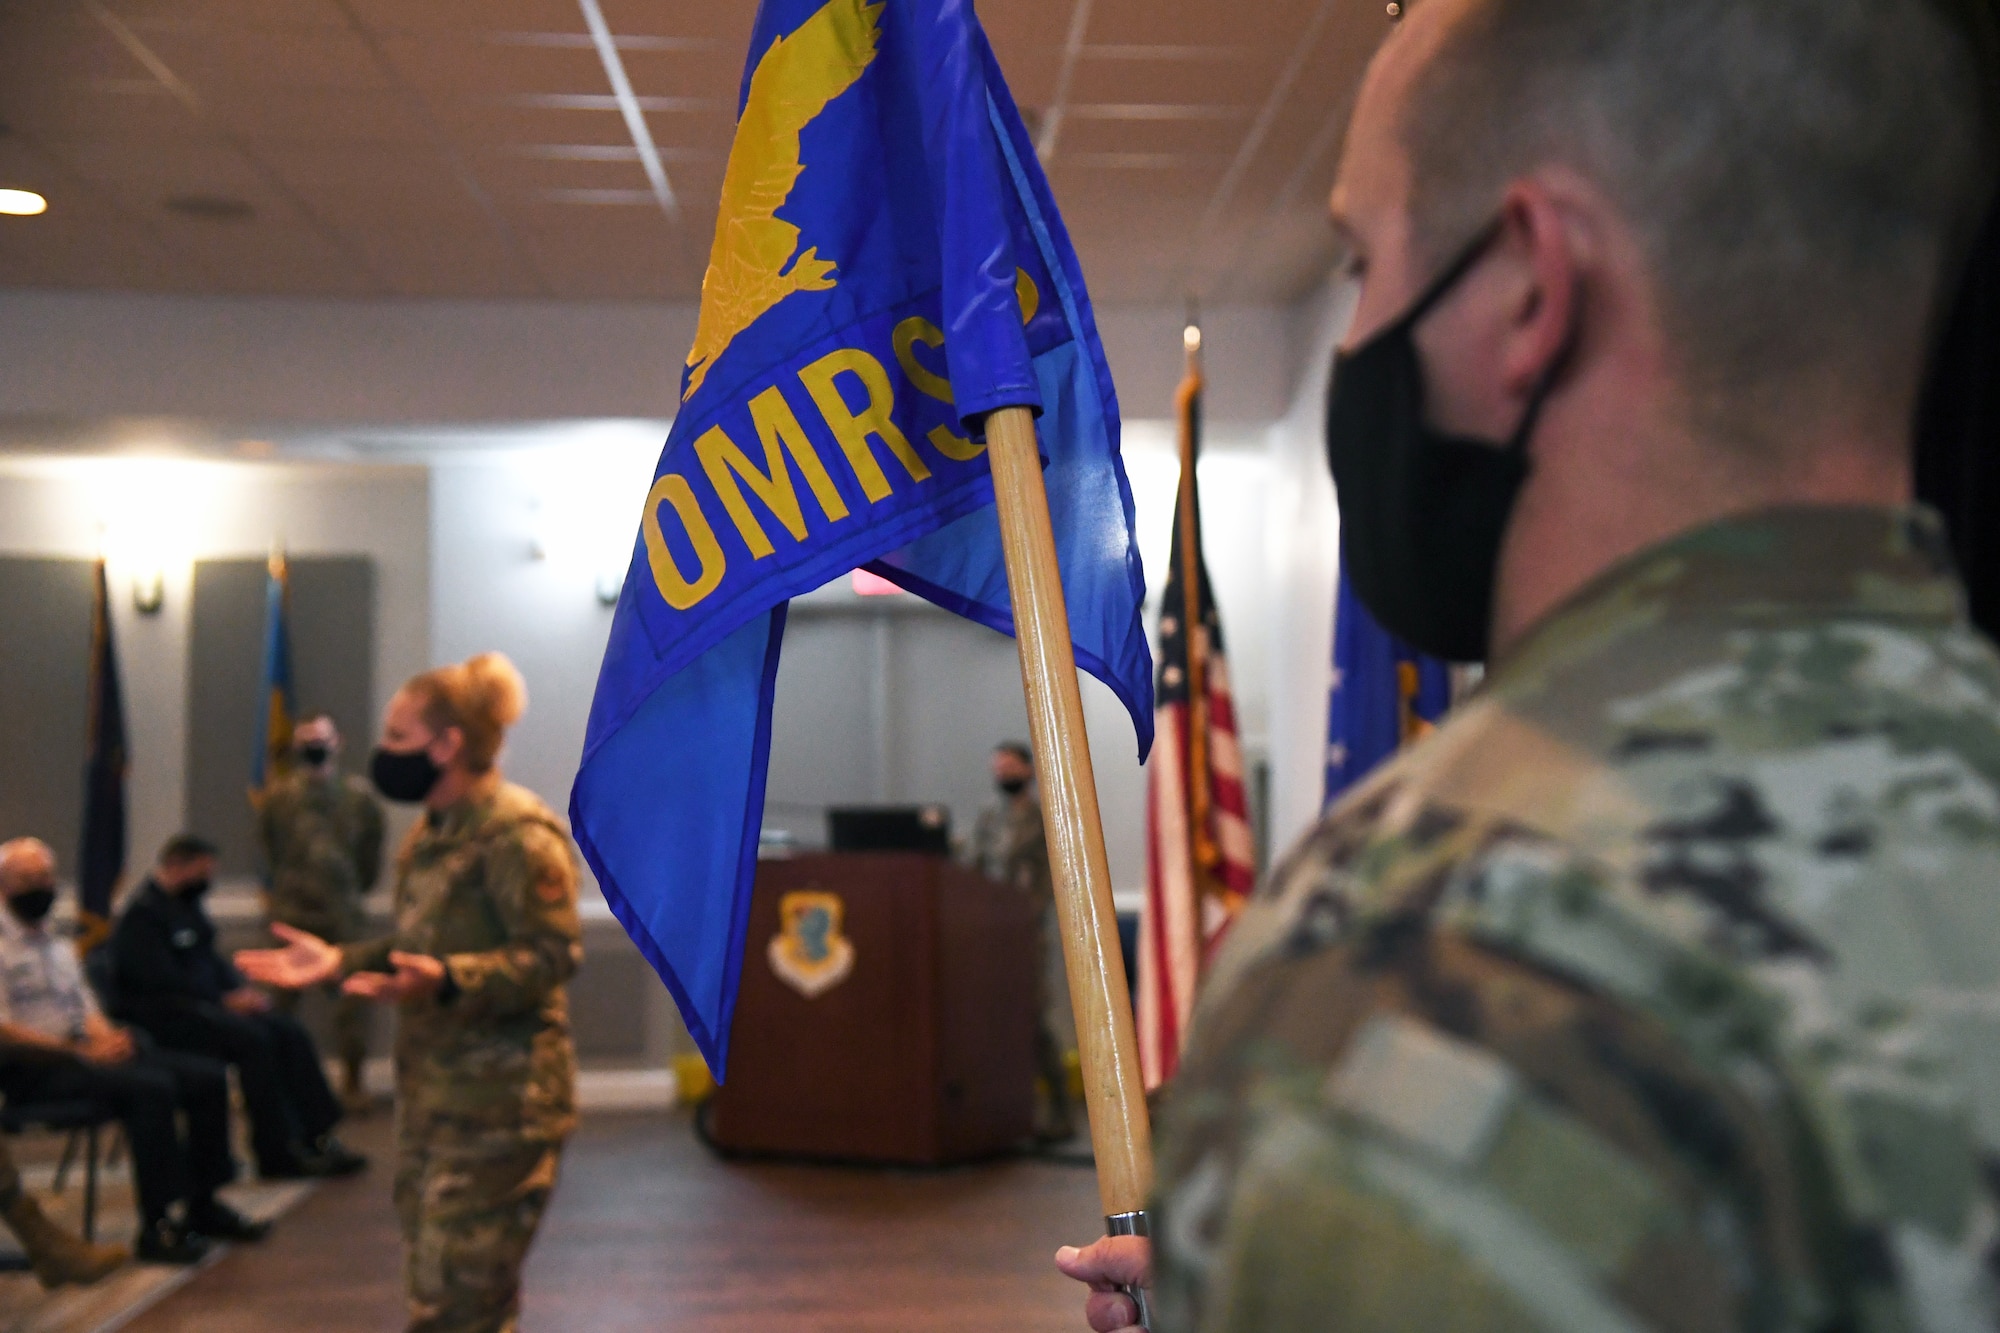 U.S. Air Force Master Sgt. Jeremy Keely, 81st Operational Medical Readiness Squadron superintendent, presents the 81st OMRS guidon during a redesignation ceremony inside the Keesler Medical Center at Keesler Air Force Base, Mississippi, September 30, 2020. In an effort to meet Department of Defense policy to increase operational medical readiness and duty availability for active duty personnel, while continuing to ensure the delivery of high quality health care, the 81st OMRS replaced the 81st Aerospace Medicine Squadron. (U.S. Air Force photo by Kemberly Groue)